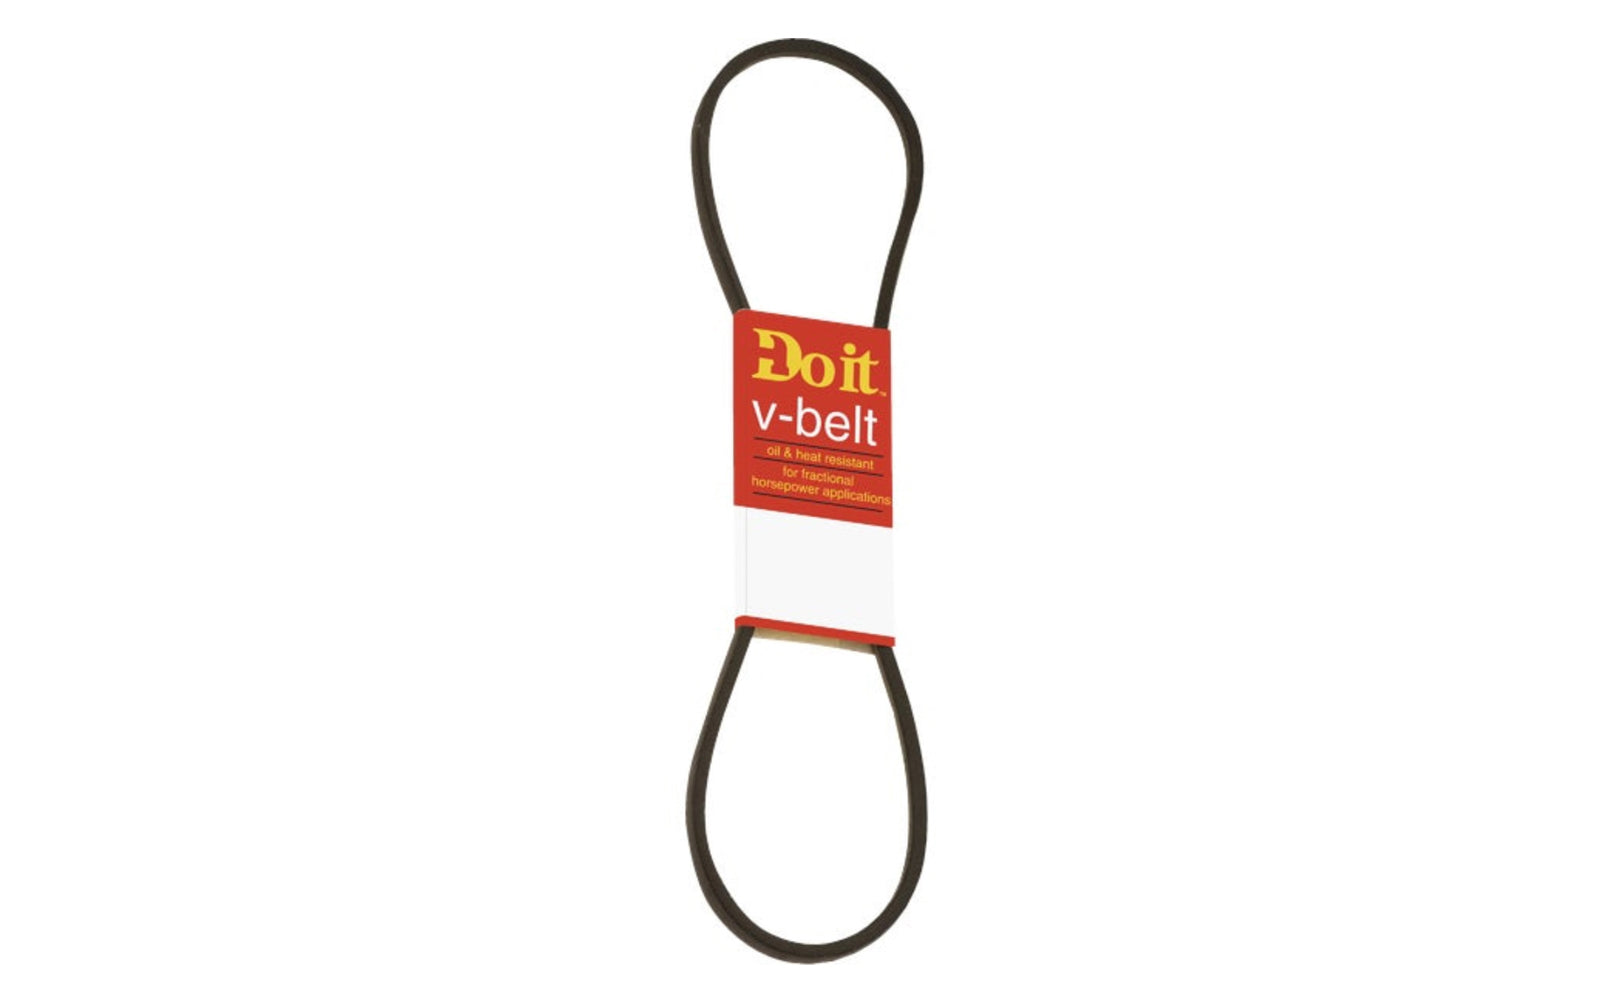 21" Long x 1/2" Width V-Belt - 4L210. Oil & heat resistant. Recommended for 1-3 HP (horsepower) light-duty applications. Typically the best option for electric powered applications. For refrigerators, washing machines, pumps, stokers, woodworking machines. Pulley type: A-Pulley.